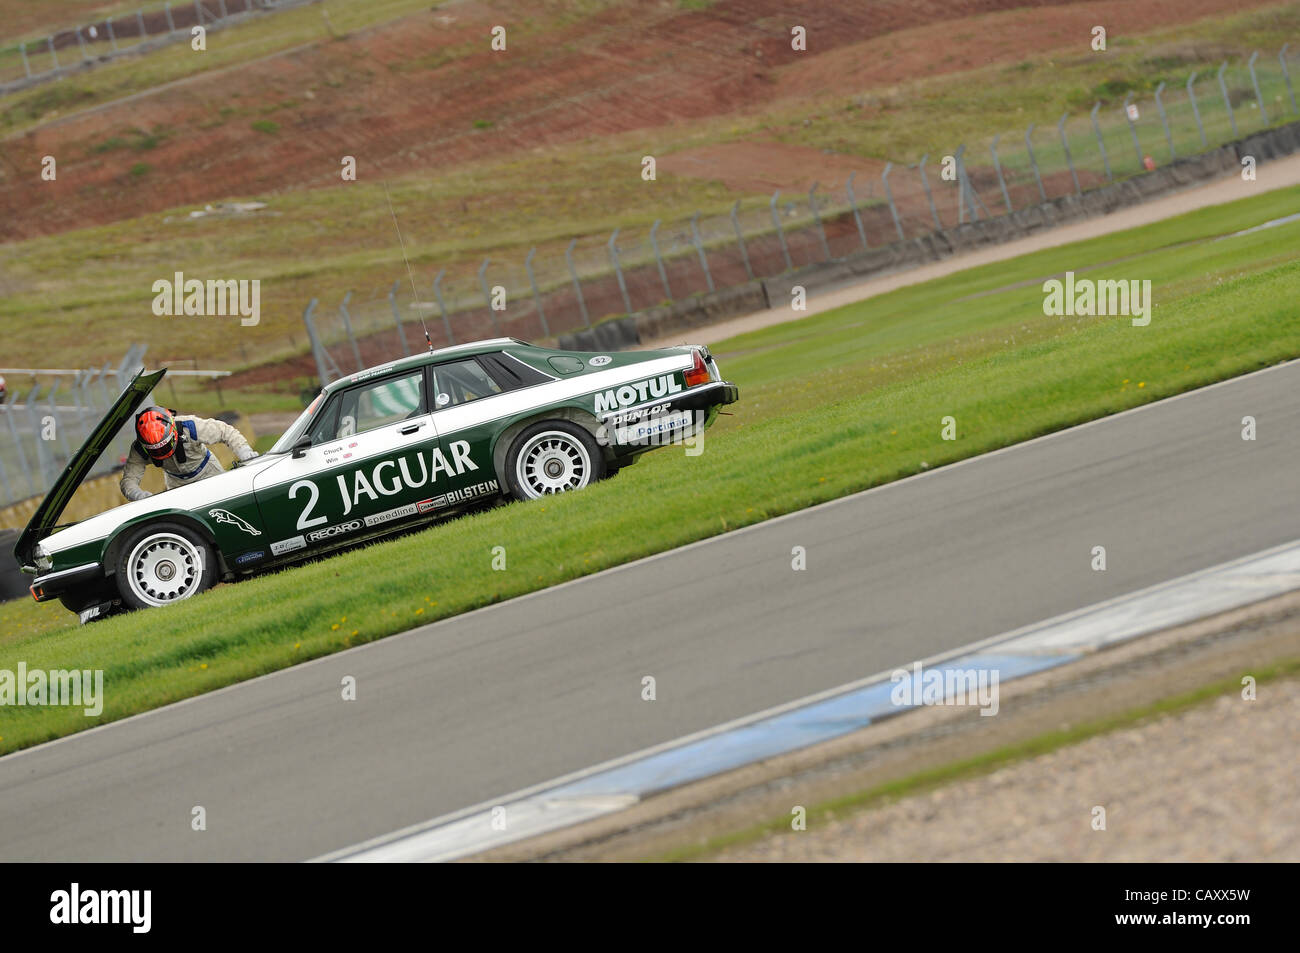 5th May 2012, Donington Park Racing Circuit, UK.  The Jaguar TWR XJS of ALex Buncombe and Gary Pearson broken down at the Donington Historic Festival Stock Photo